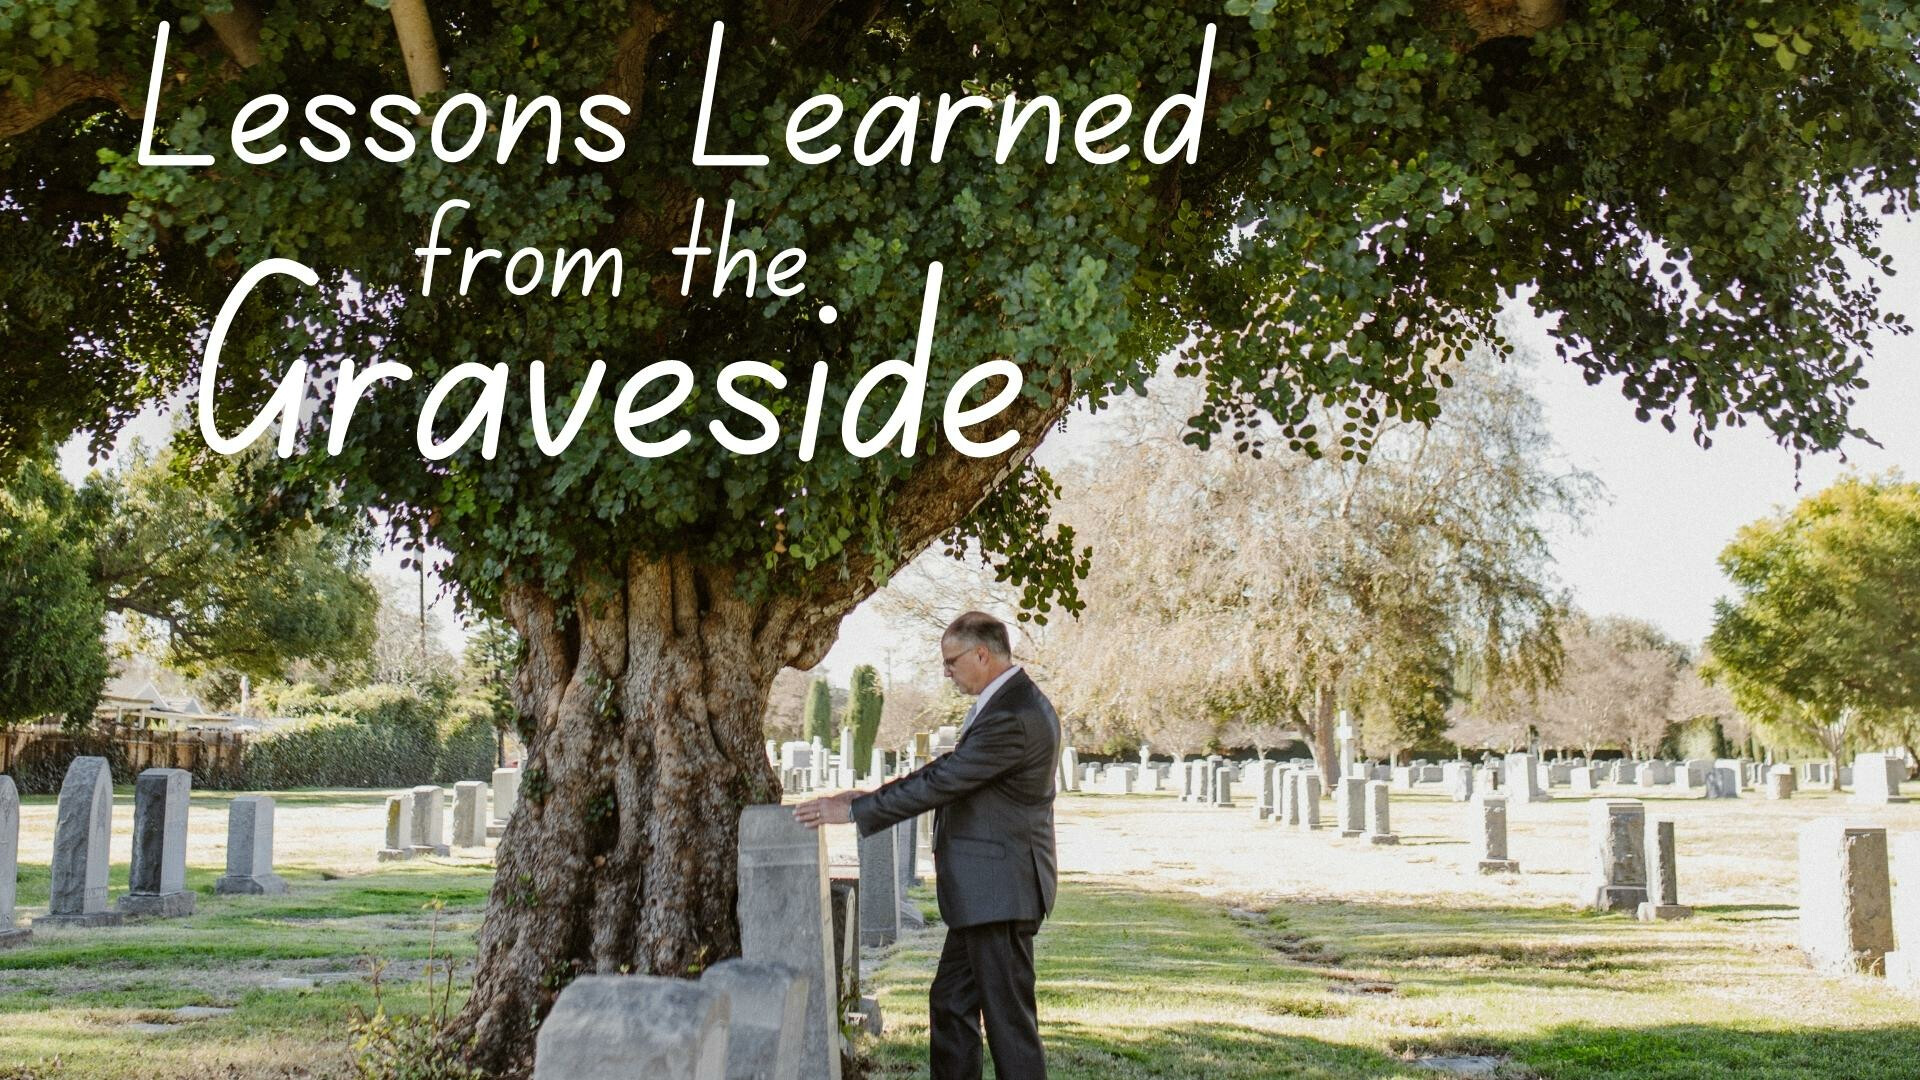 Lessons Learned from the Graveside, Children's Message